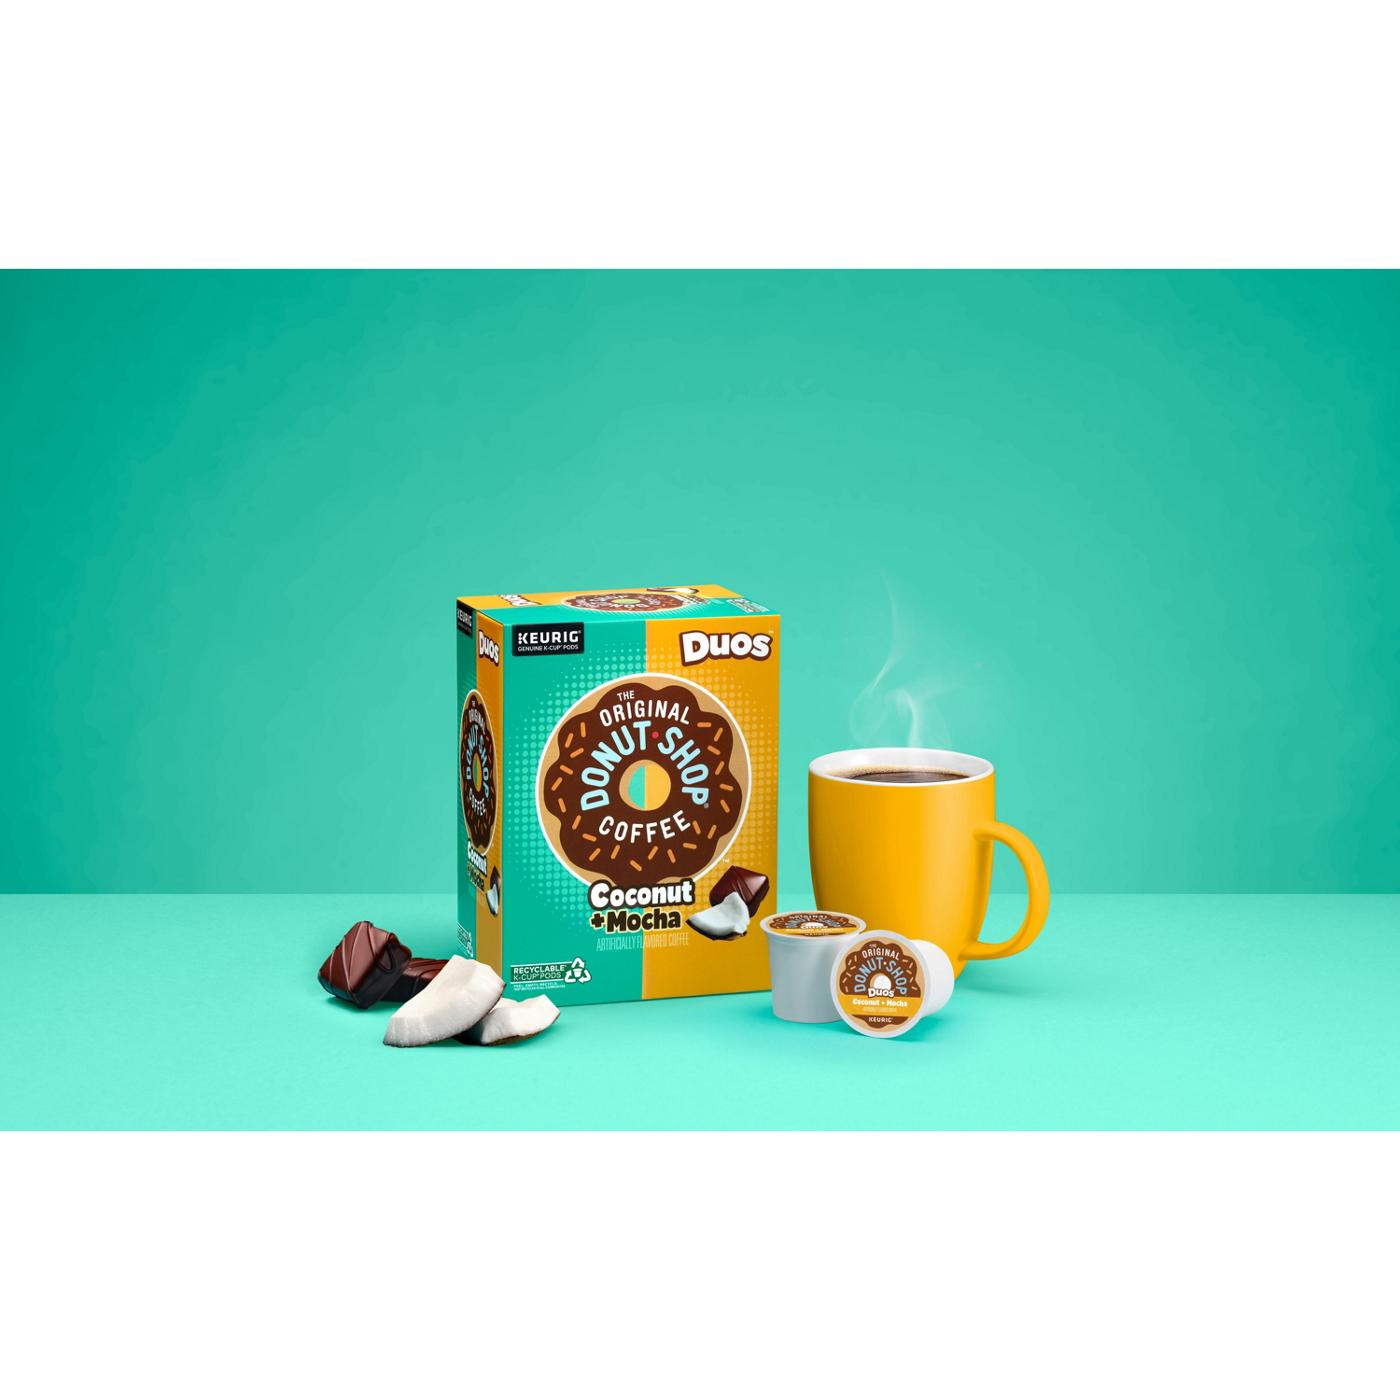 Donut Shop Duos Coconut and Mocha Single Serve Coffee K Cups; image 3 of 11